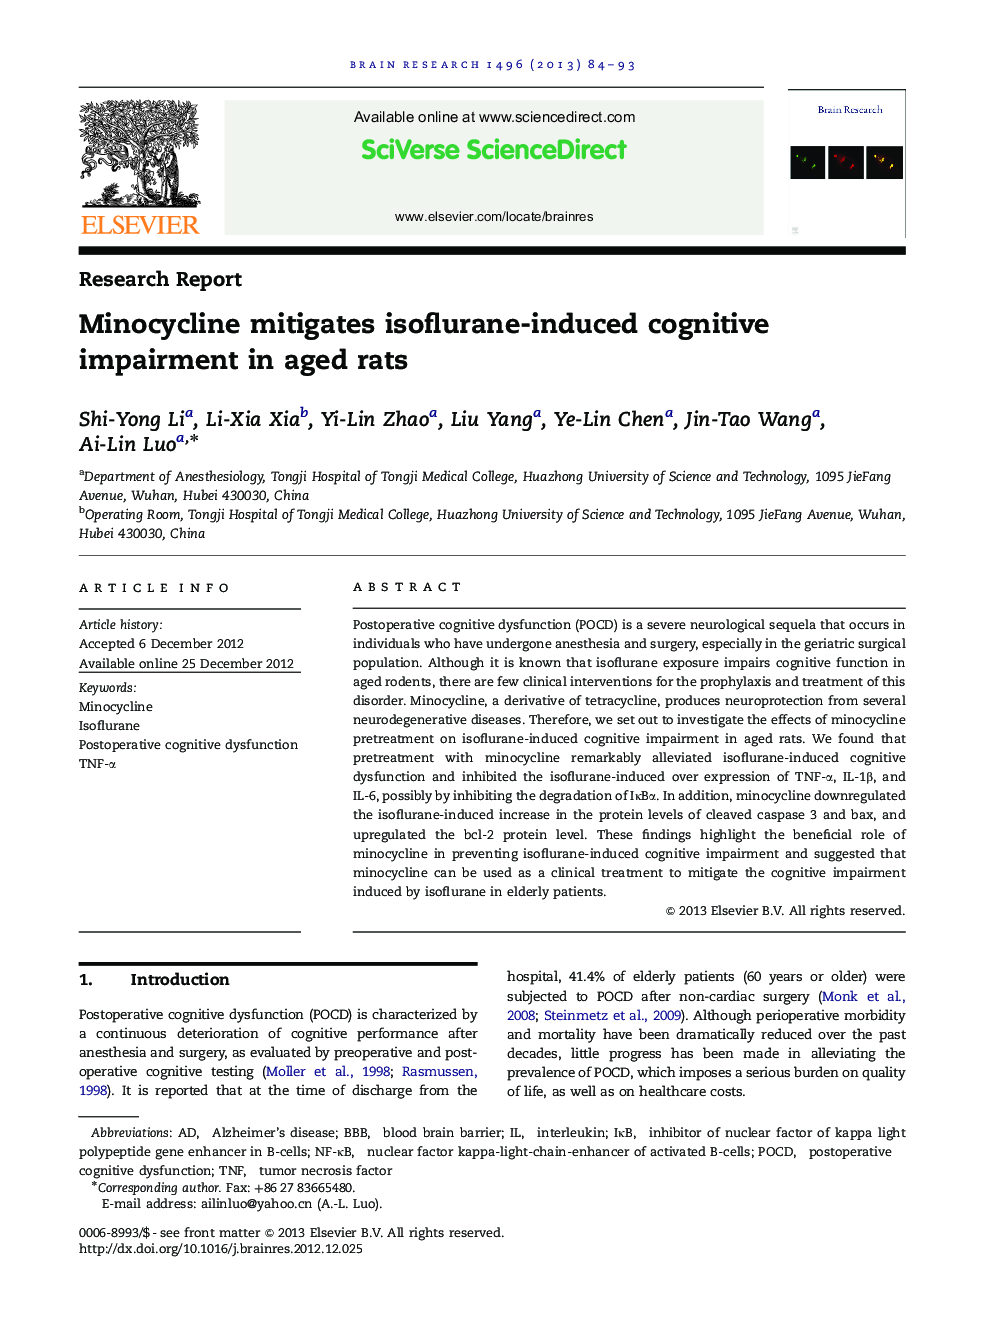 Research ReportMinocycline mitigates isoflurane-induced cognitive impairment in aged rats